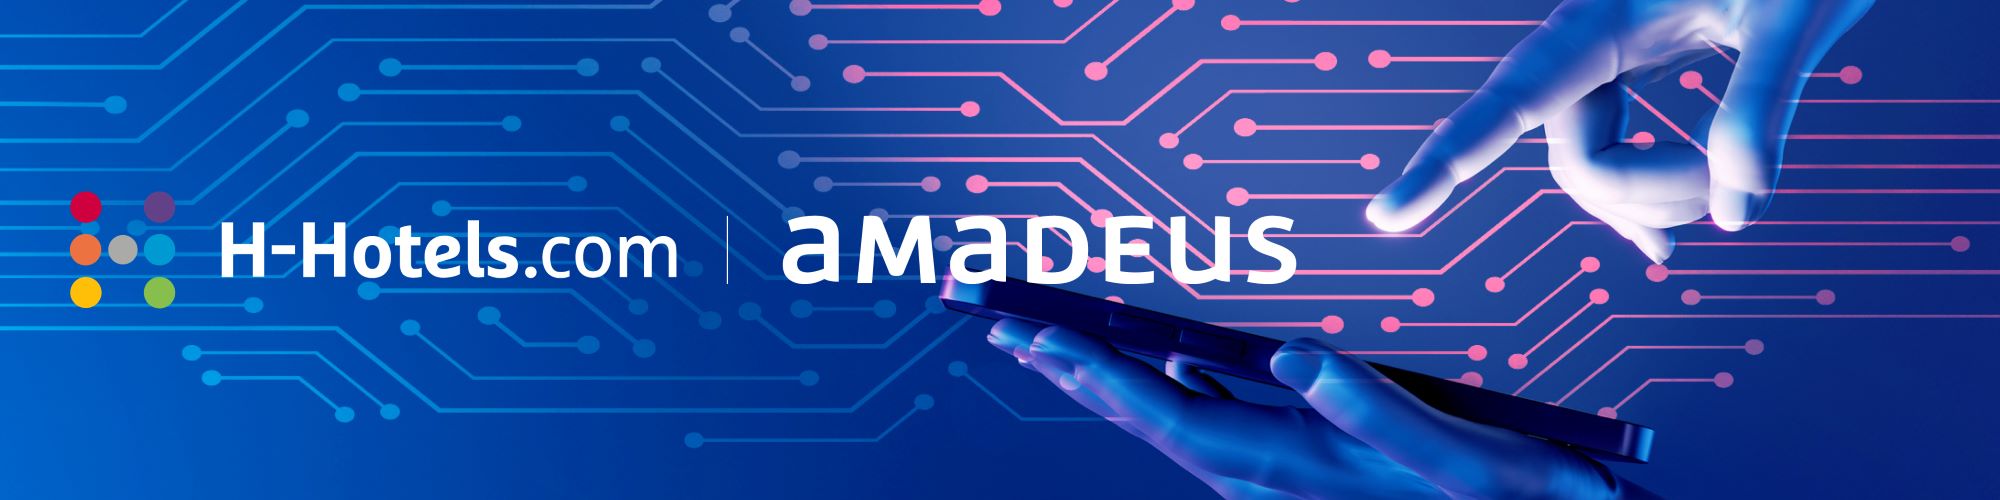 H-Hotels.com Adds Digital Media Solutions to Successful Partnership with Amadeus